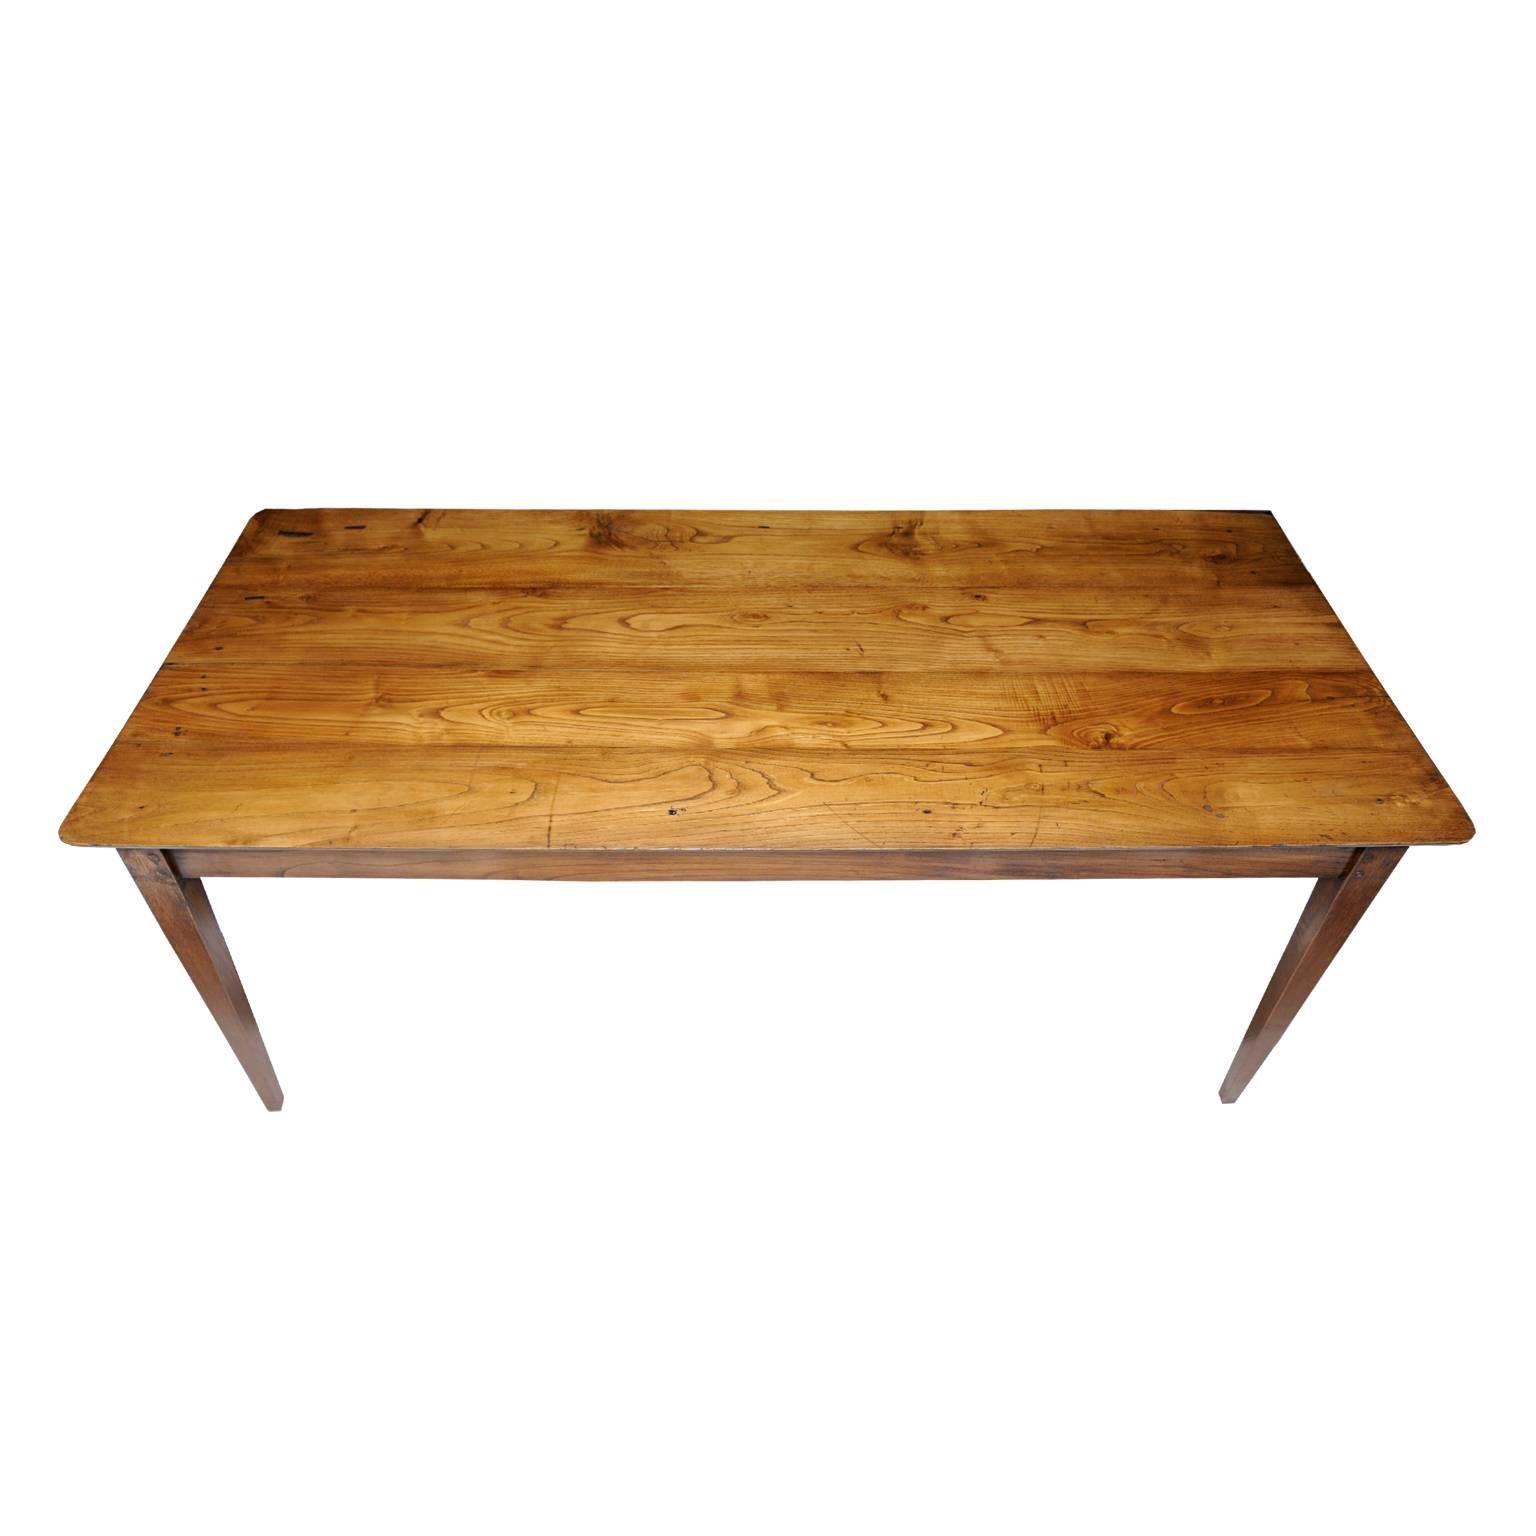 Polished French 19th Century Chestnut Provincial Farmhouse Table, circa 1820 For Sale